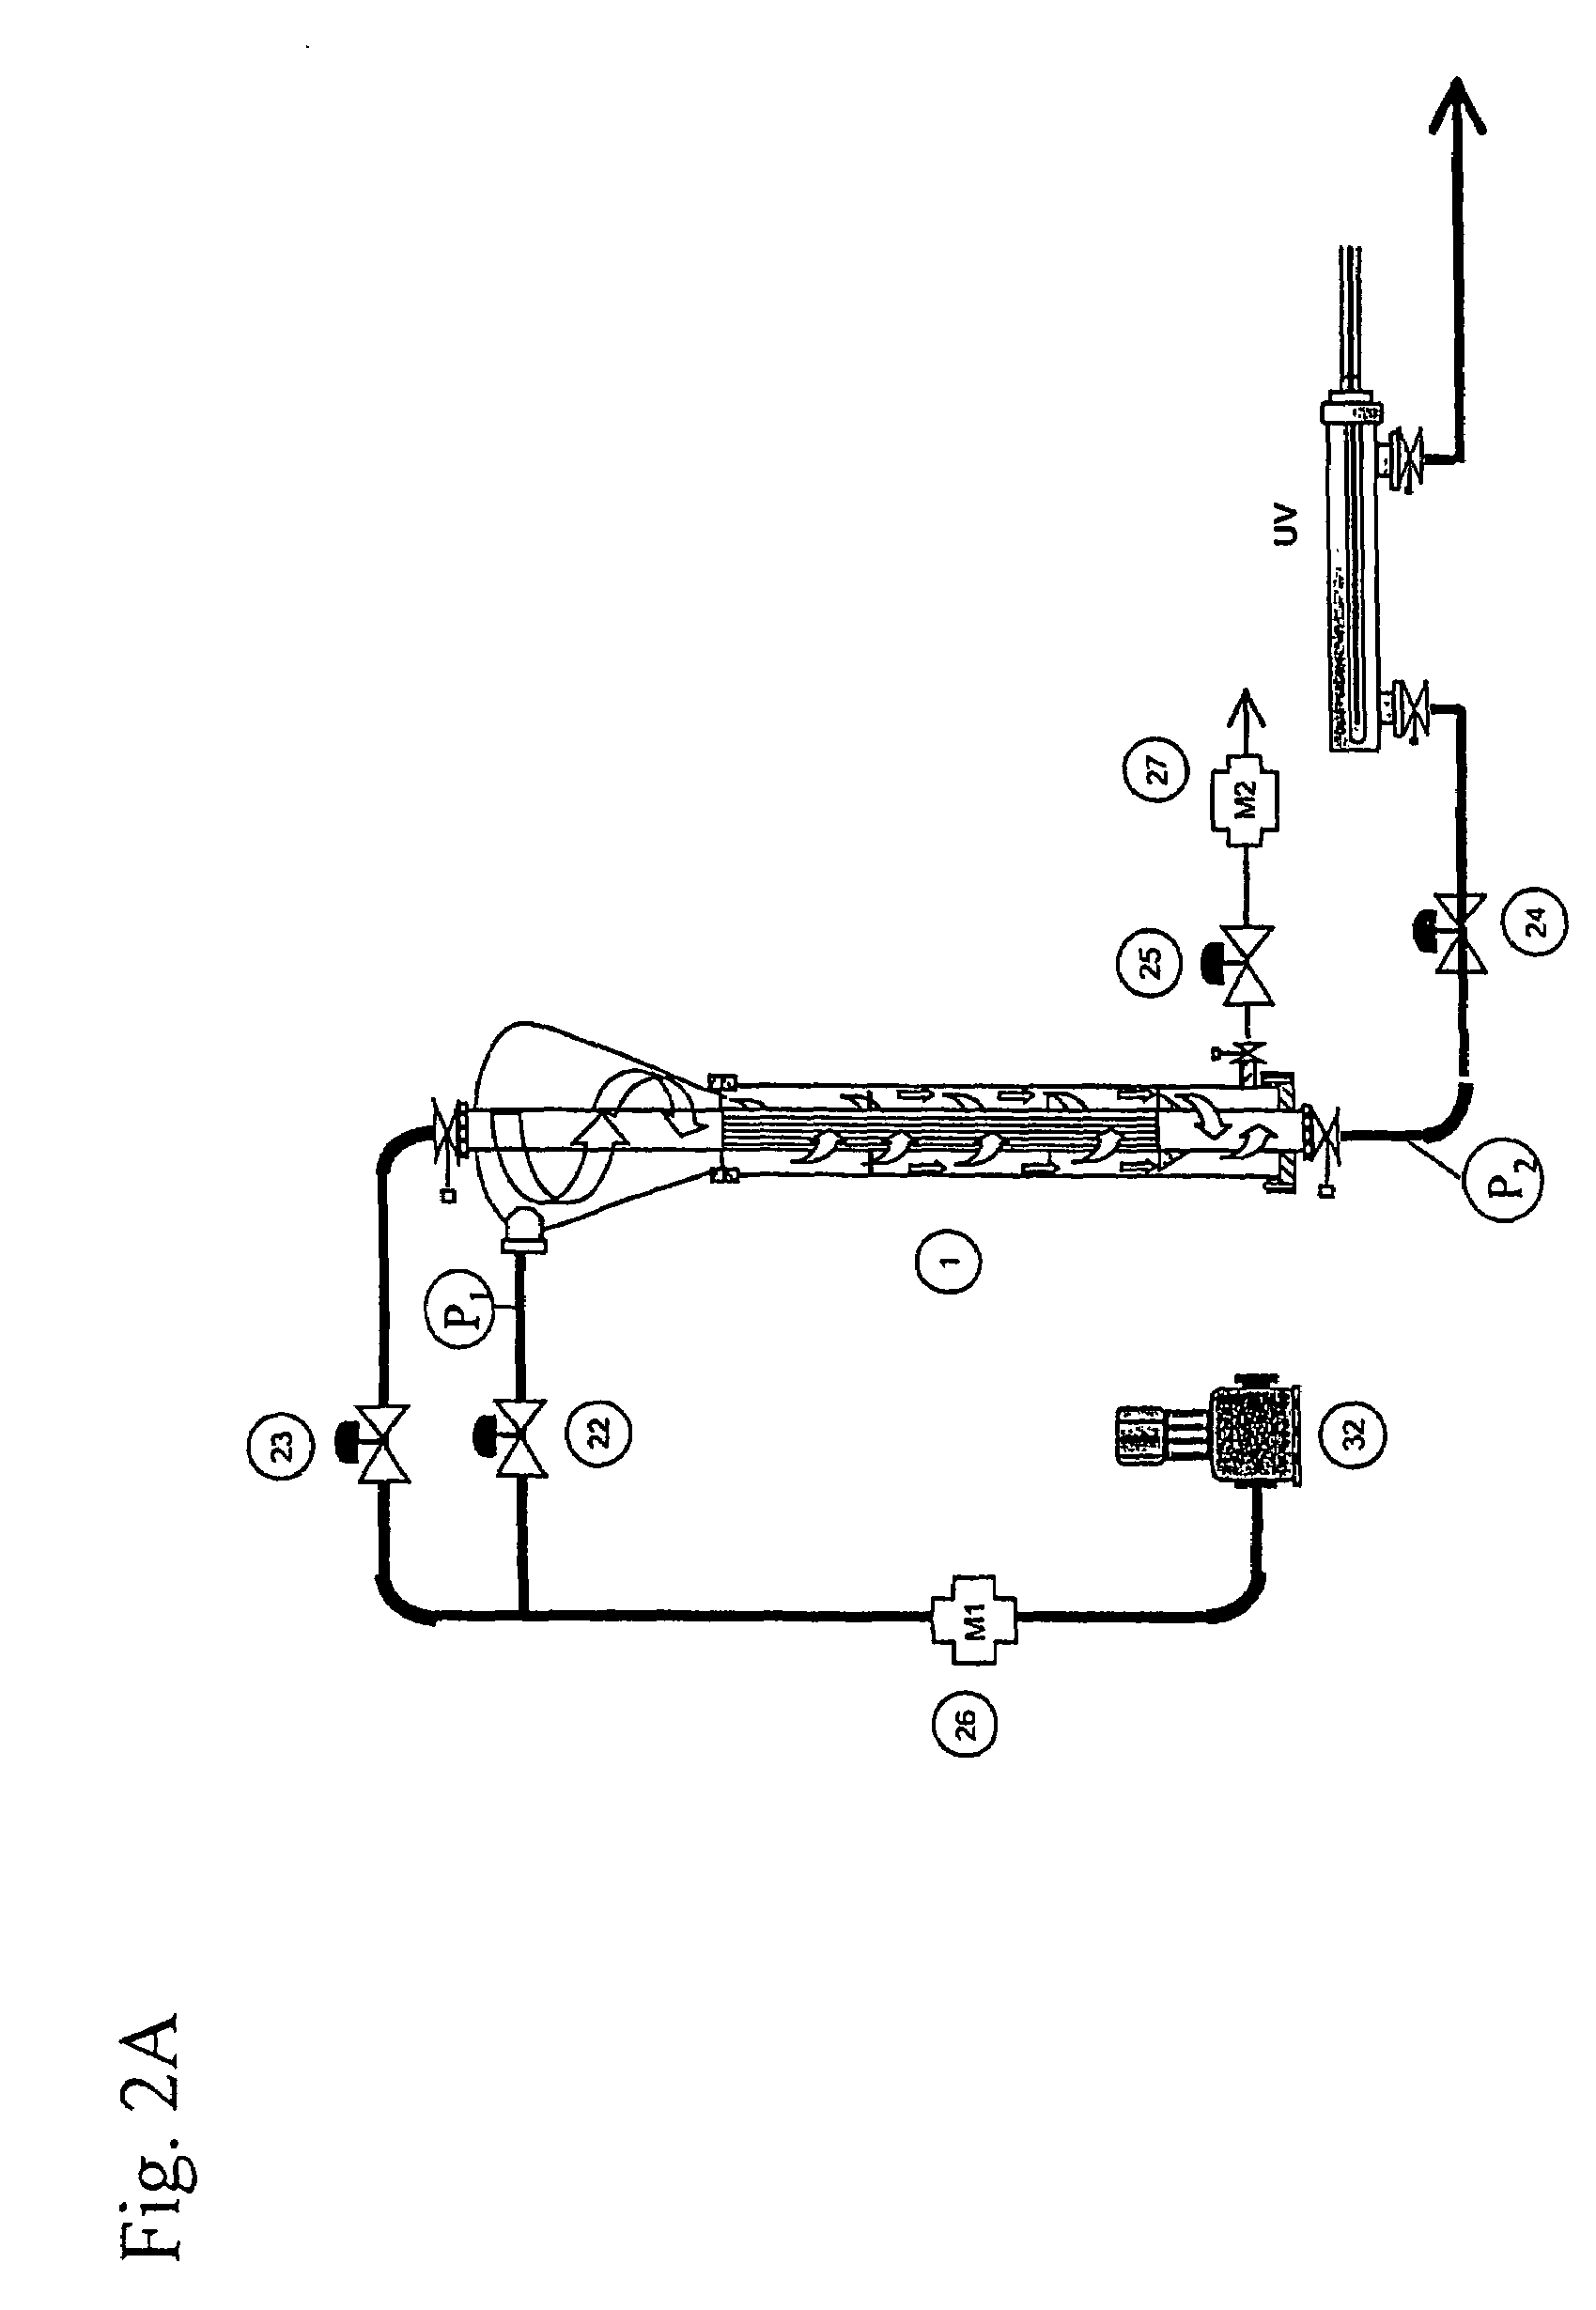 Apparatus and method for separating and filtering particles and organisms from flowing liquids